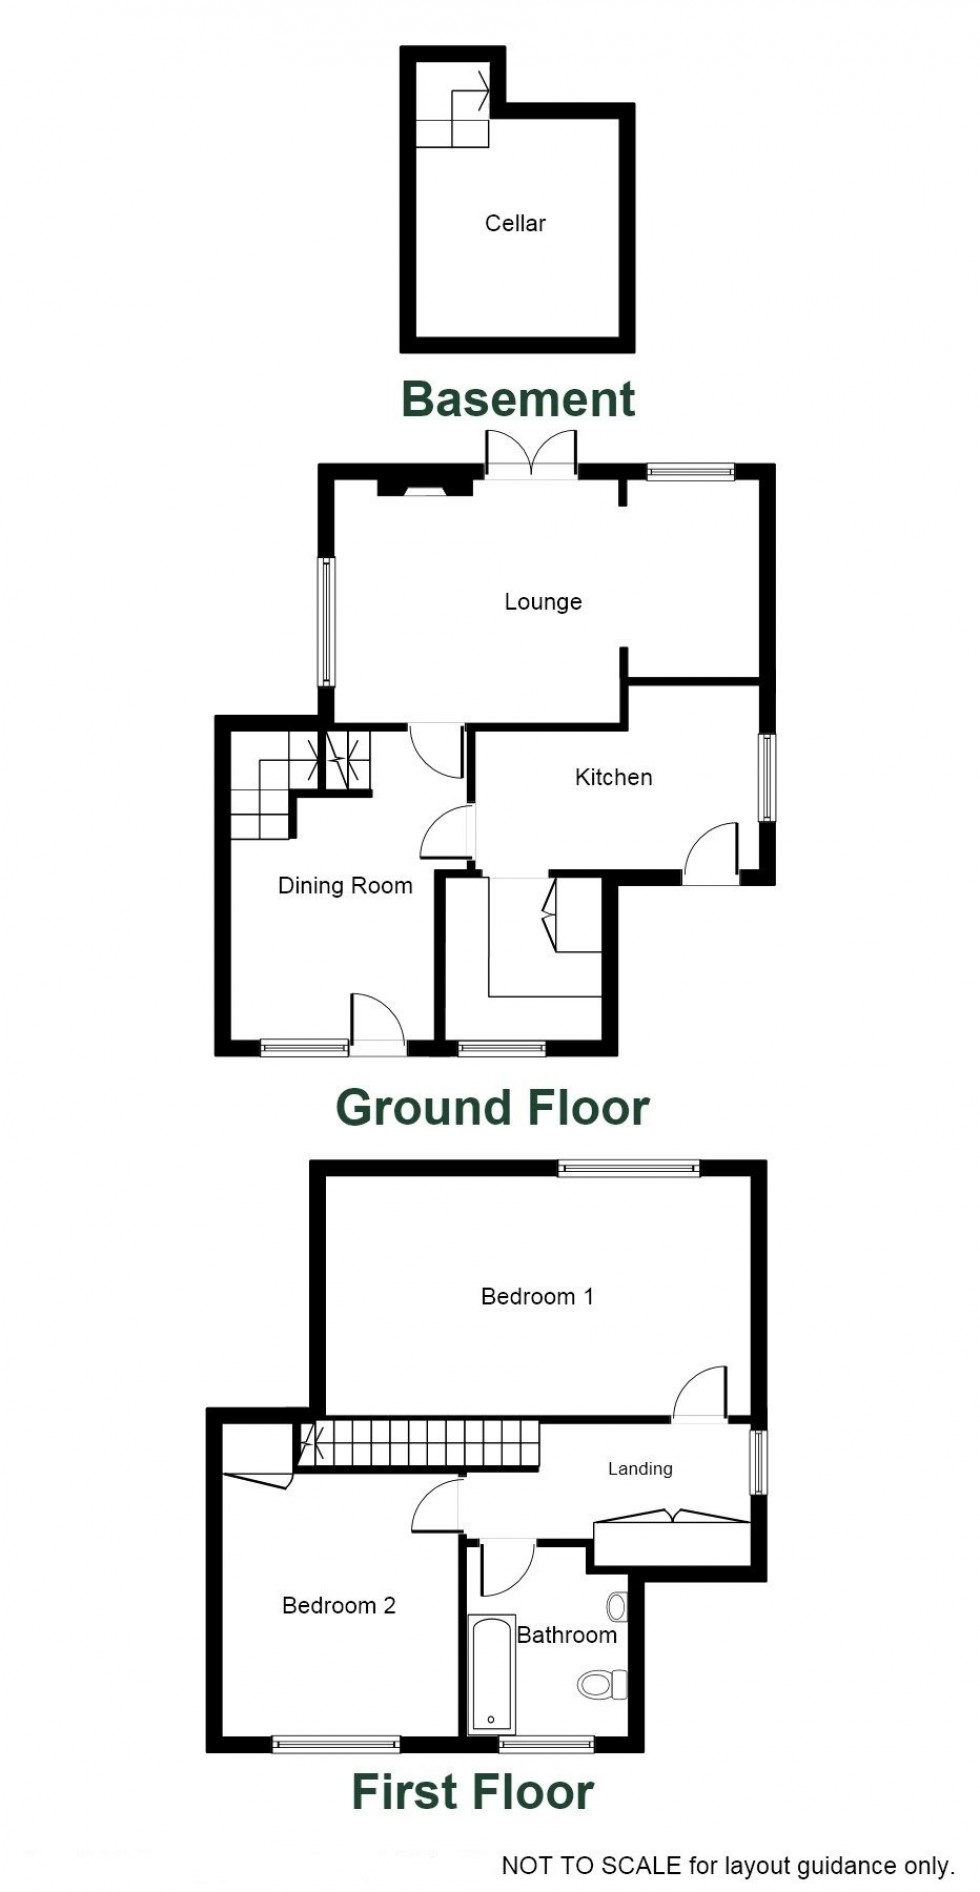 Floorplan for Clifford, Willow Lane, Wetherby, West Yorkshire, LS23